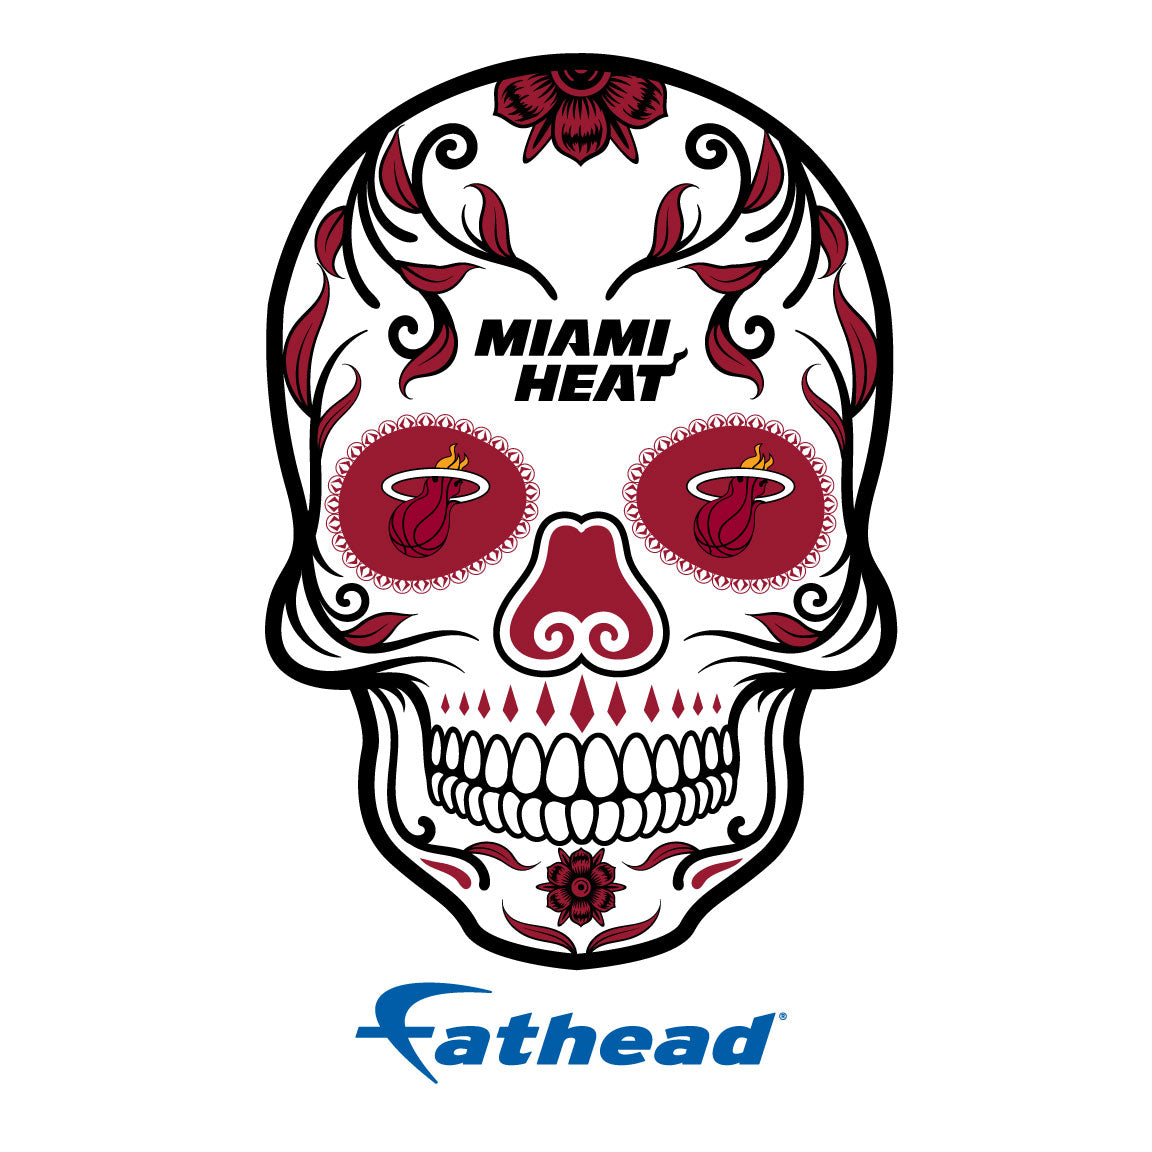 Sheet of 5 -Miami Heat: Skull Minis - Officially Licensed NBA Removable Adhesive Decal